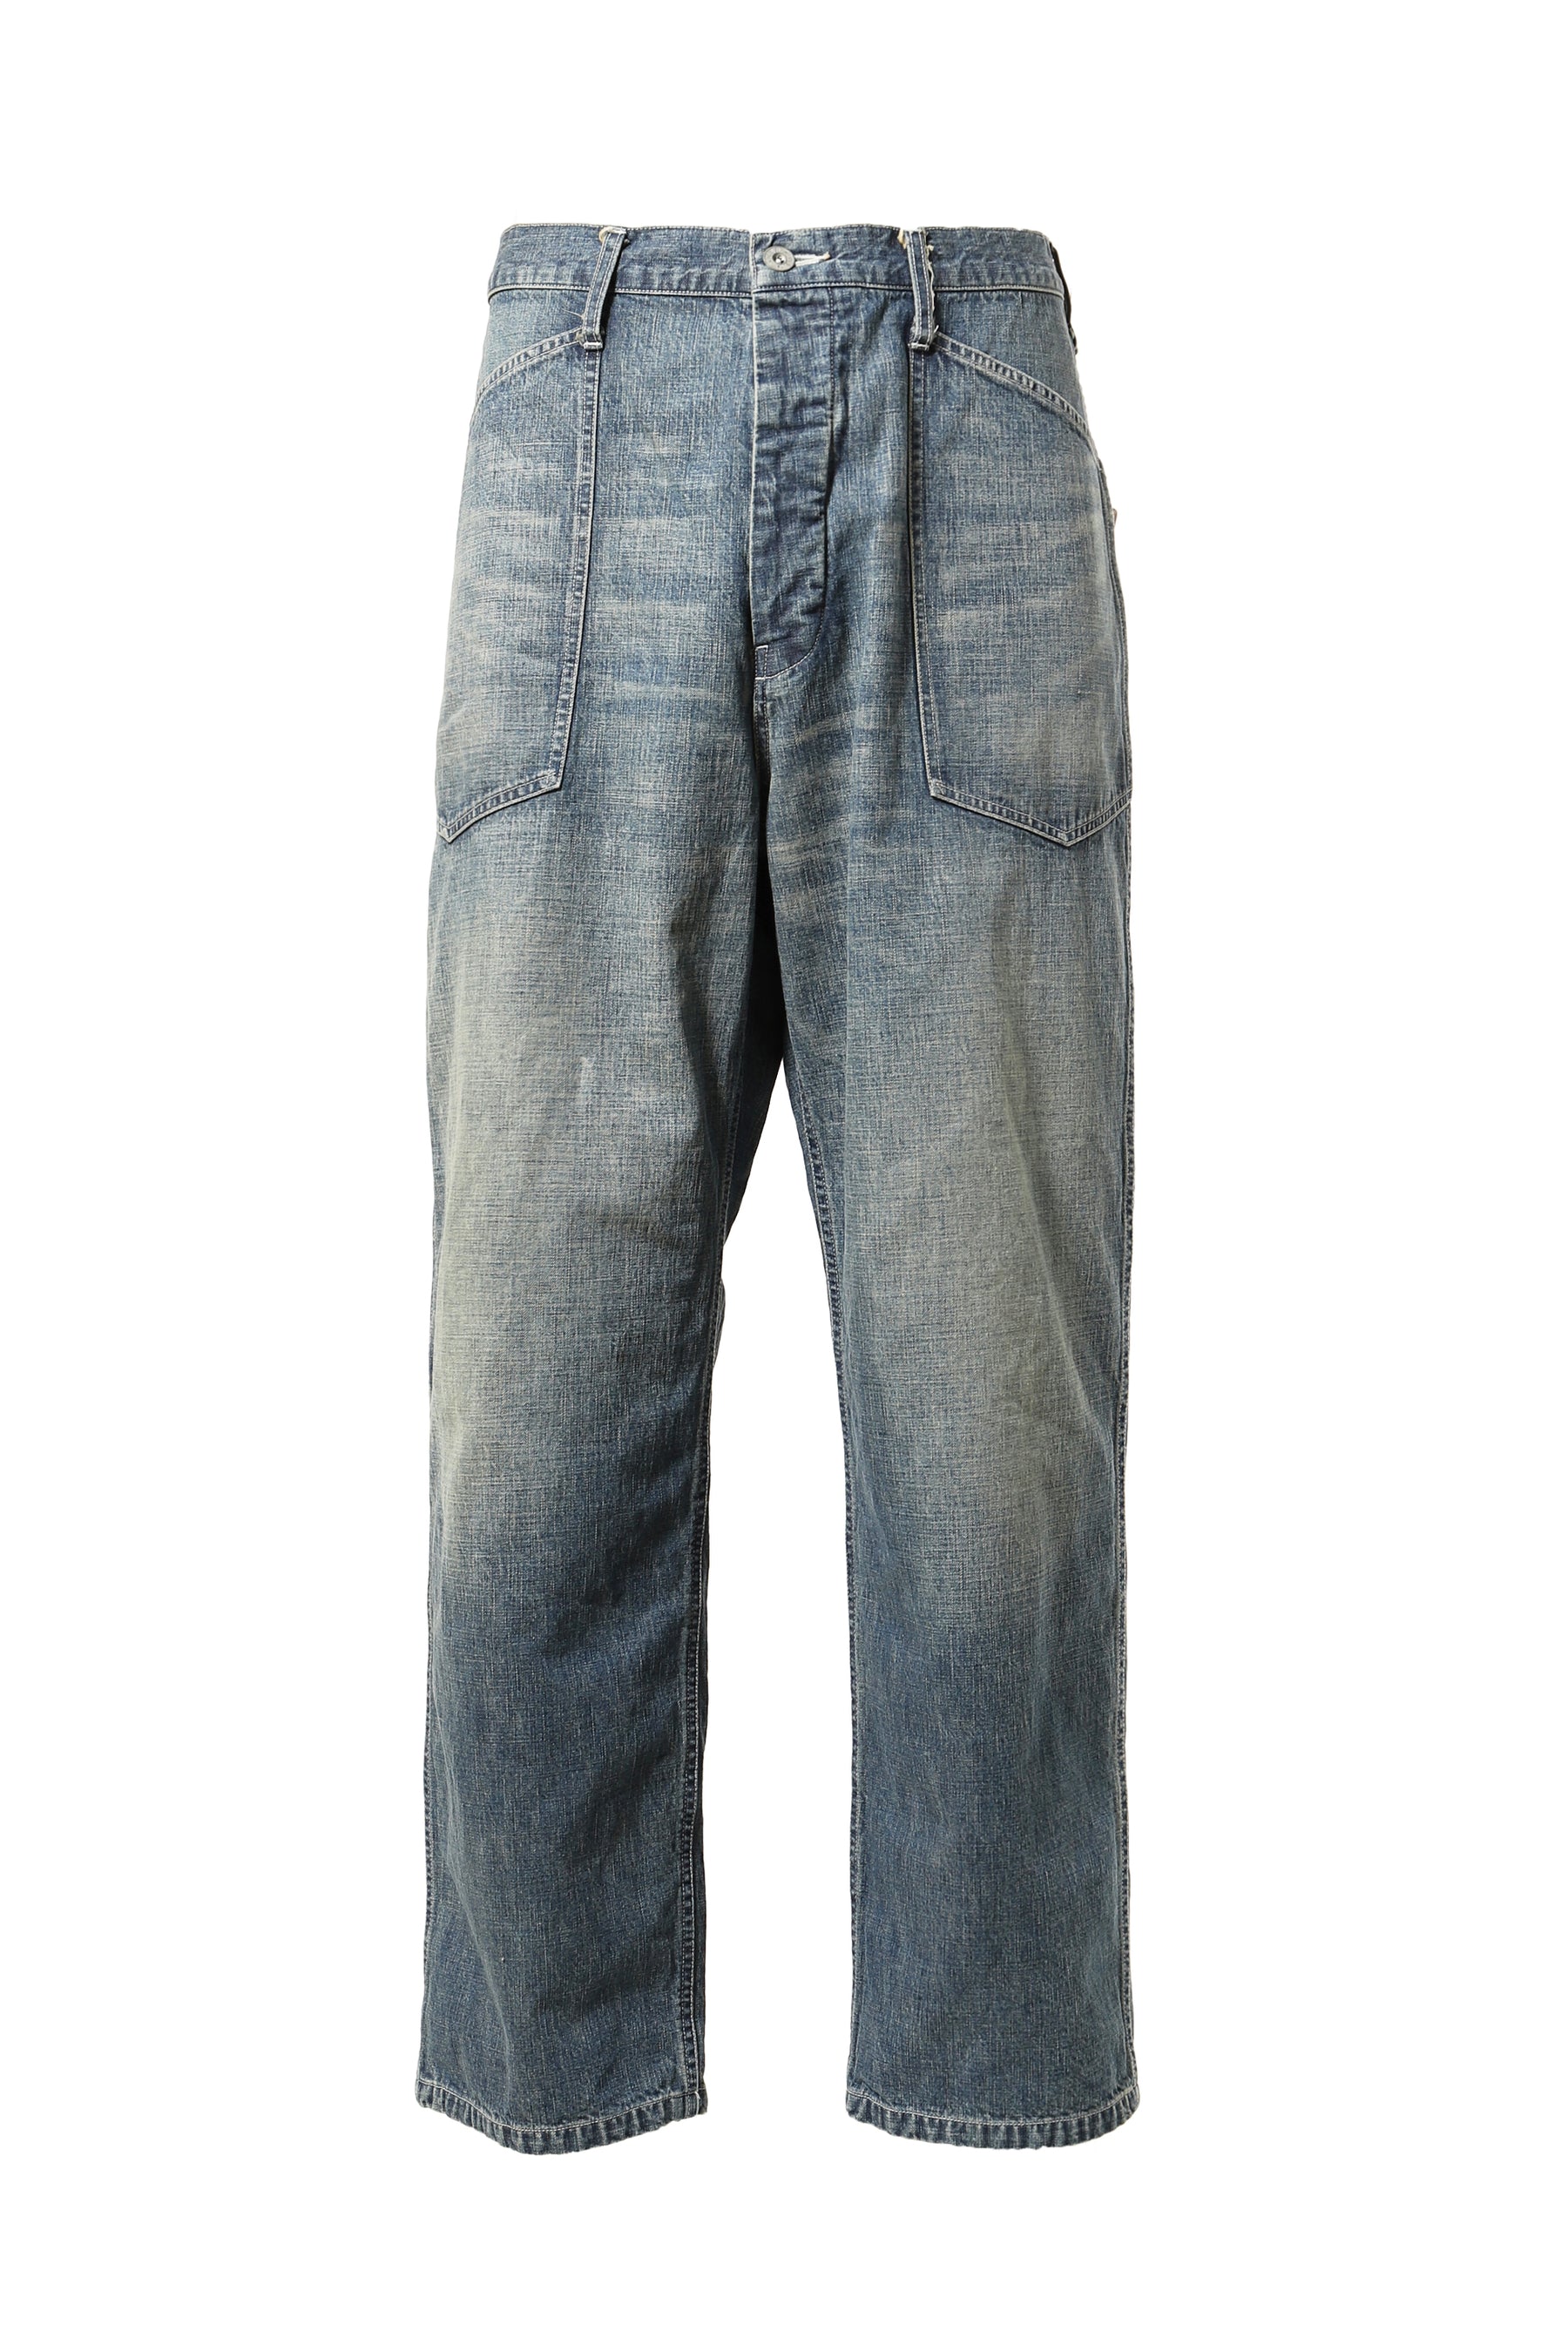 BOW WOW バウワウSS24 US ARMY M35 DENIM TROUSERS / IND AGEING - NUBIAN